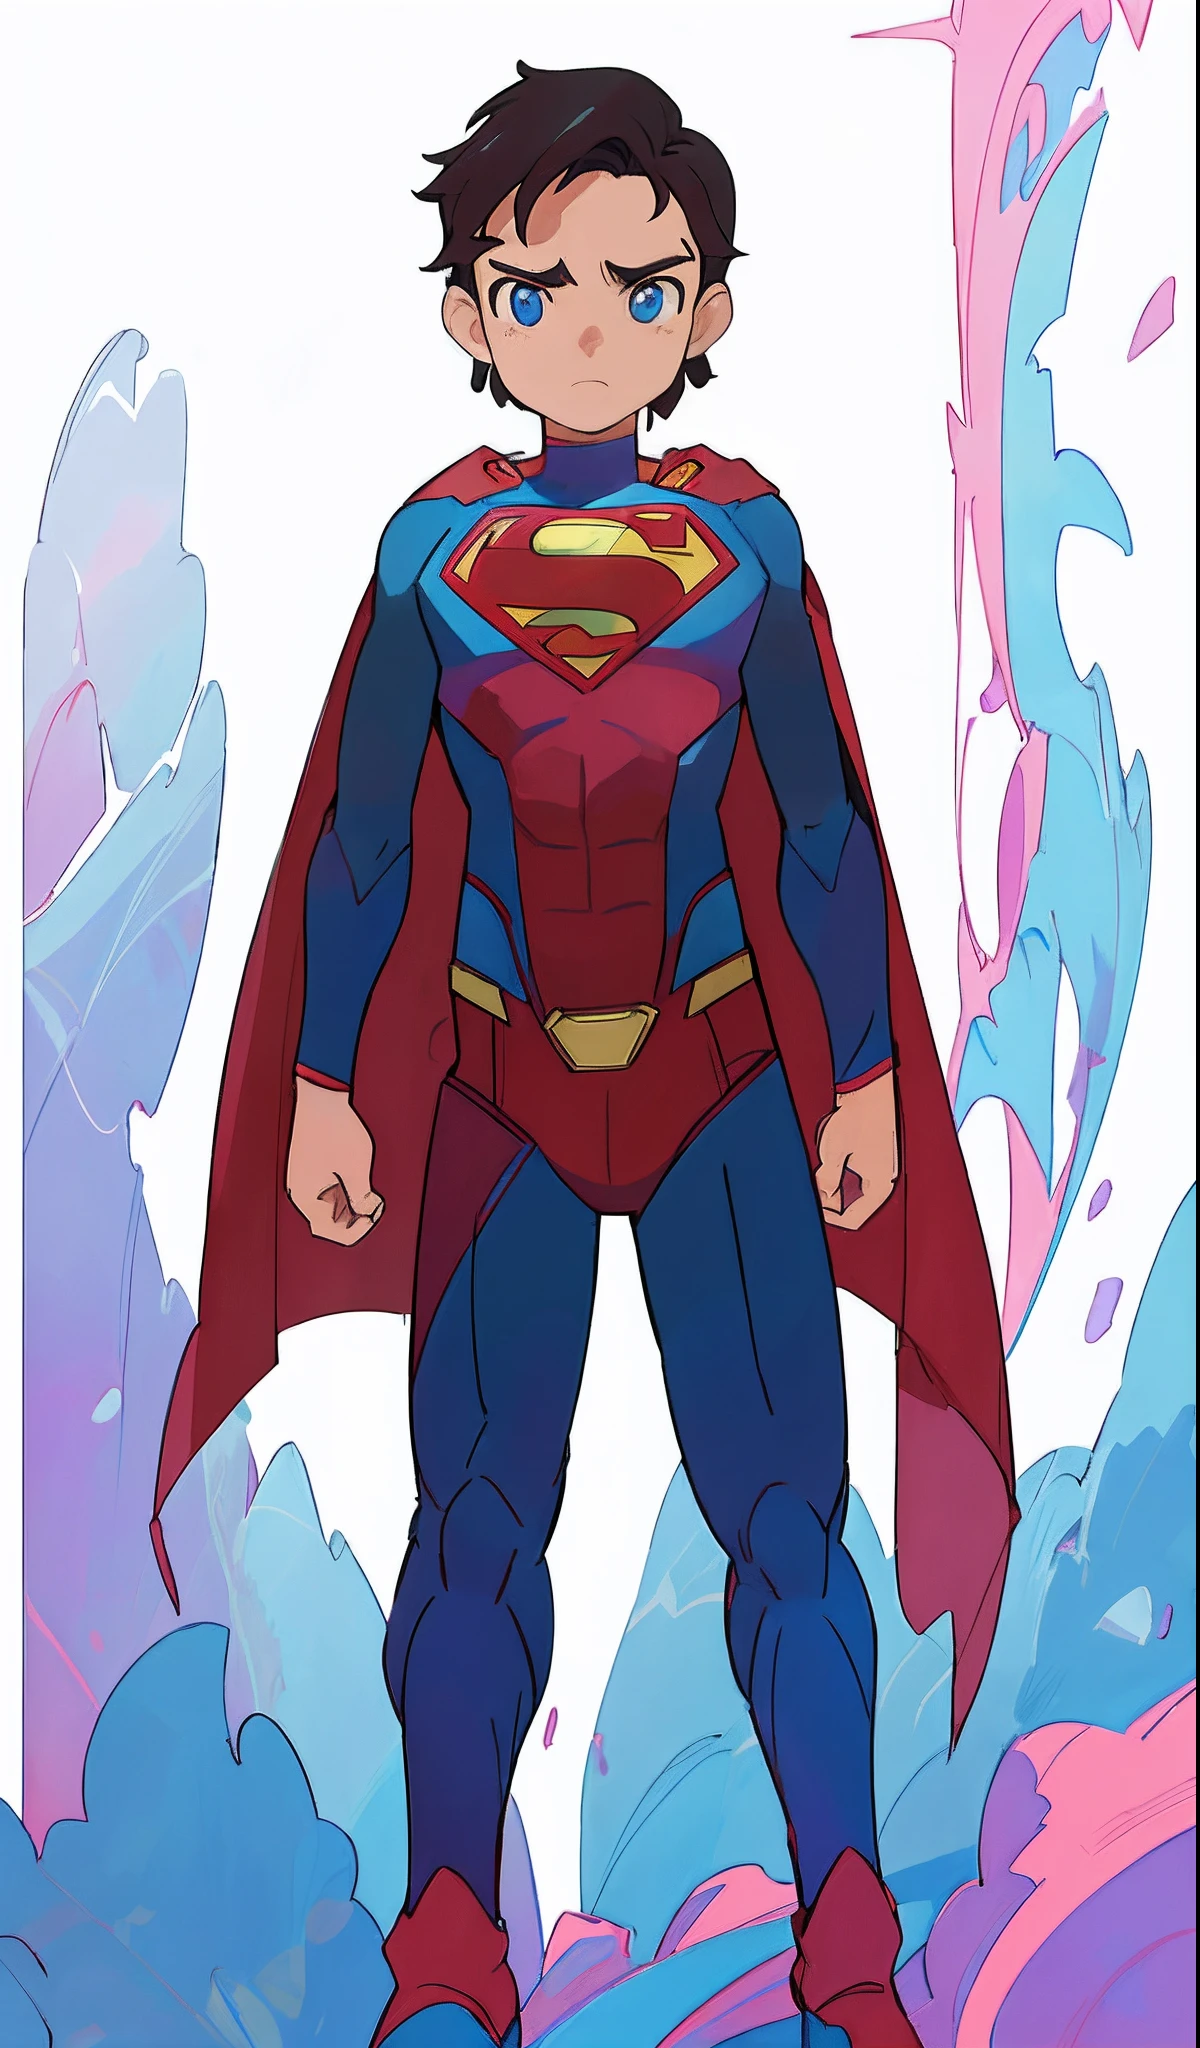 superman is standing in front of a background of blue and pink, dc comics art style, official art, official concept art, full body concept, superman, textless, inspired by Victor Mosquera, new costume concept design, by Victor Mosquera, dc comics style, digitally colored, inspired by Adam Dario Keel, clean lineart and color, superman pose, official fanart